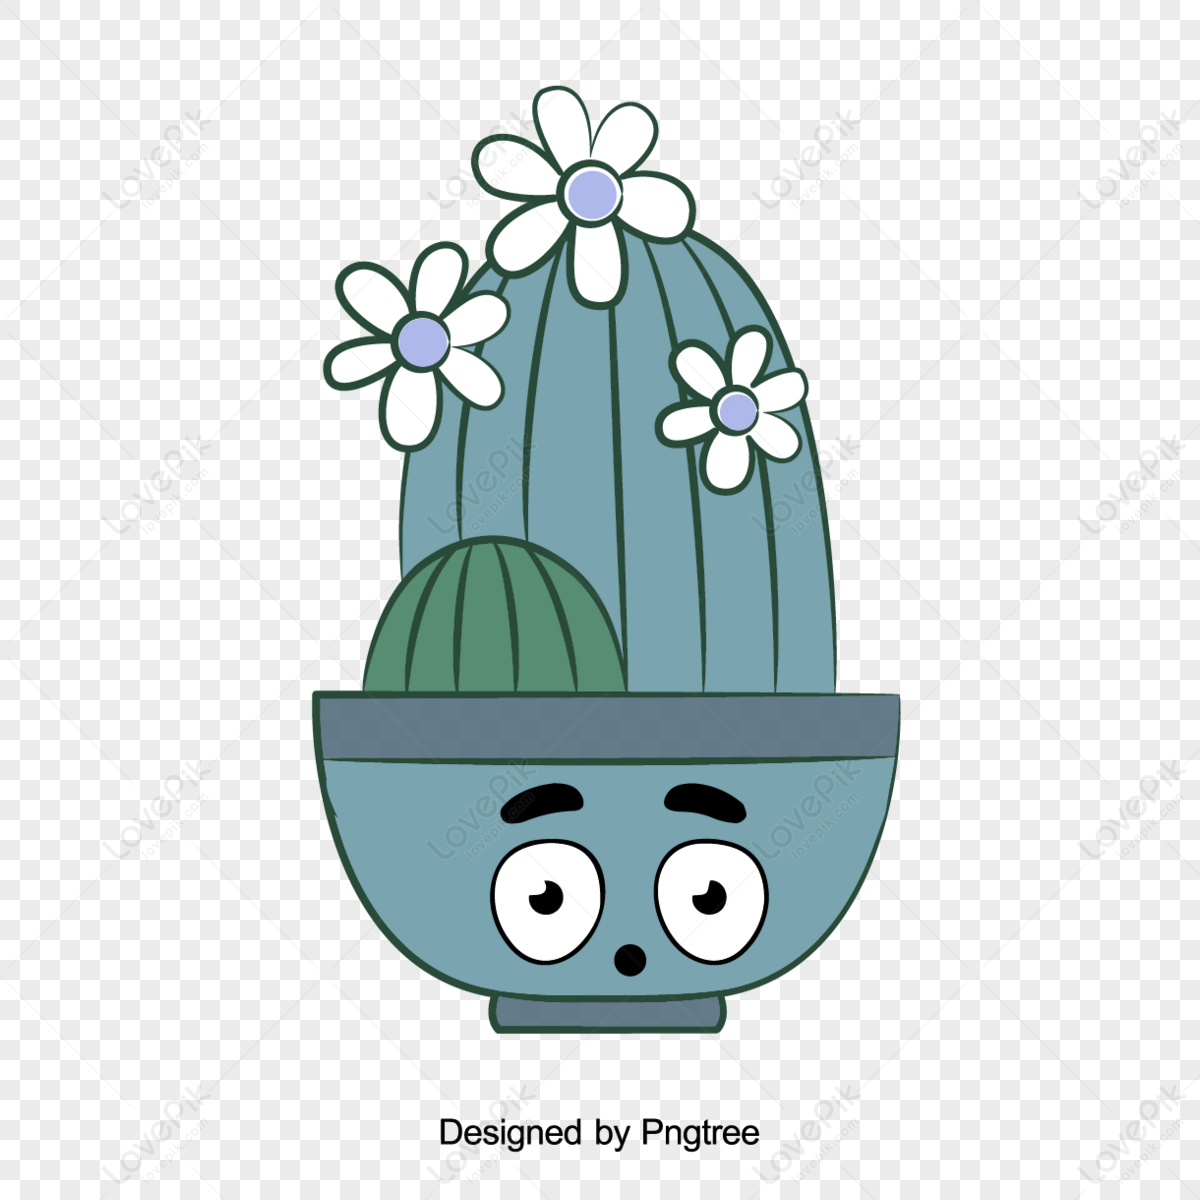 Flower Pot Drawing || Simple Flower Pot Drawing || Easy Flower Vase Drawing  for Beginners.. - YouTube